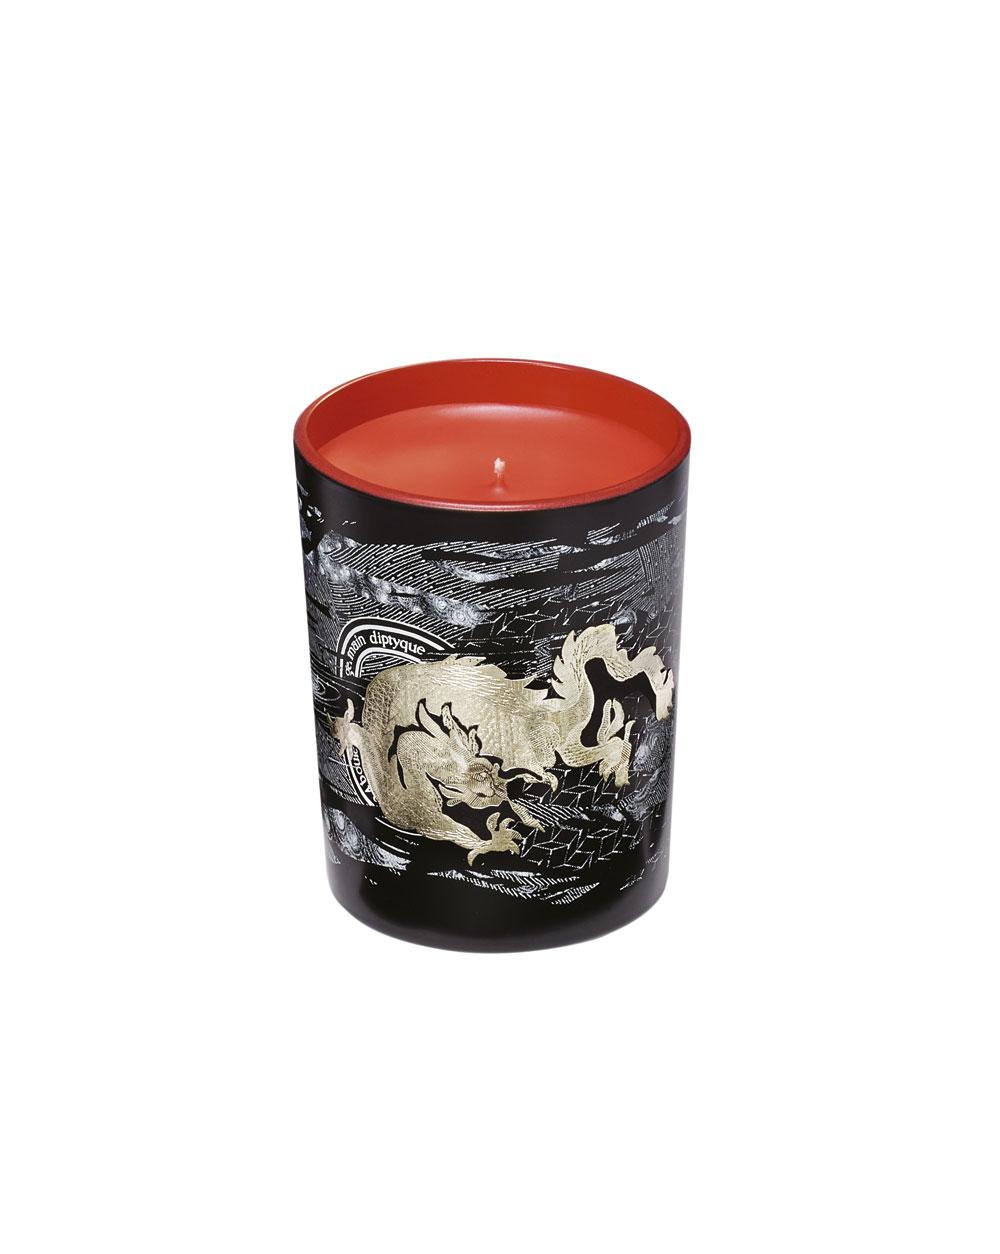 Fiery Orange Candle (60 euro), Diptyque.